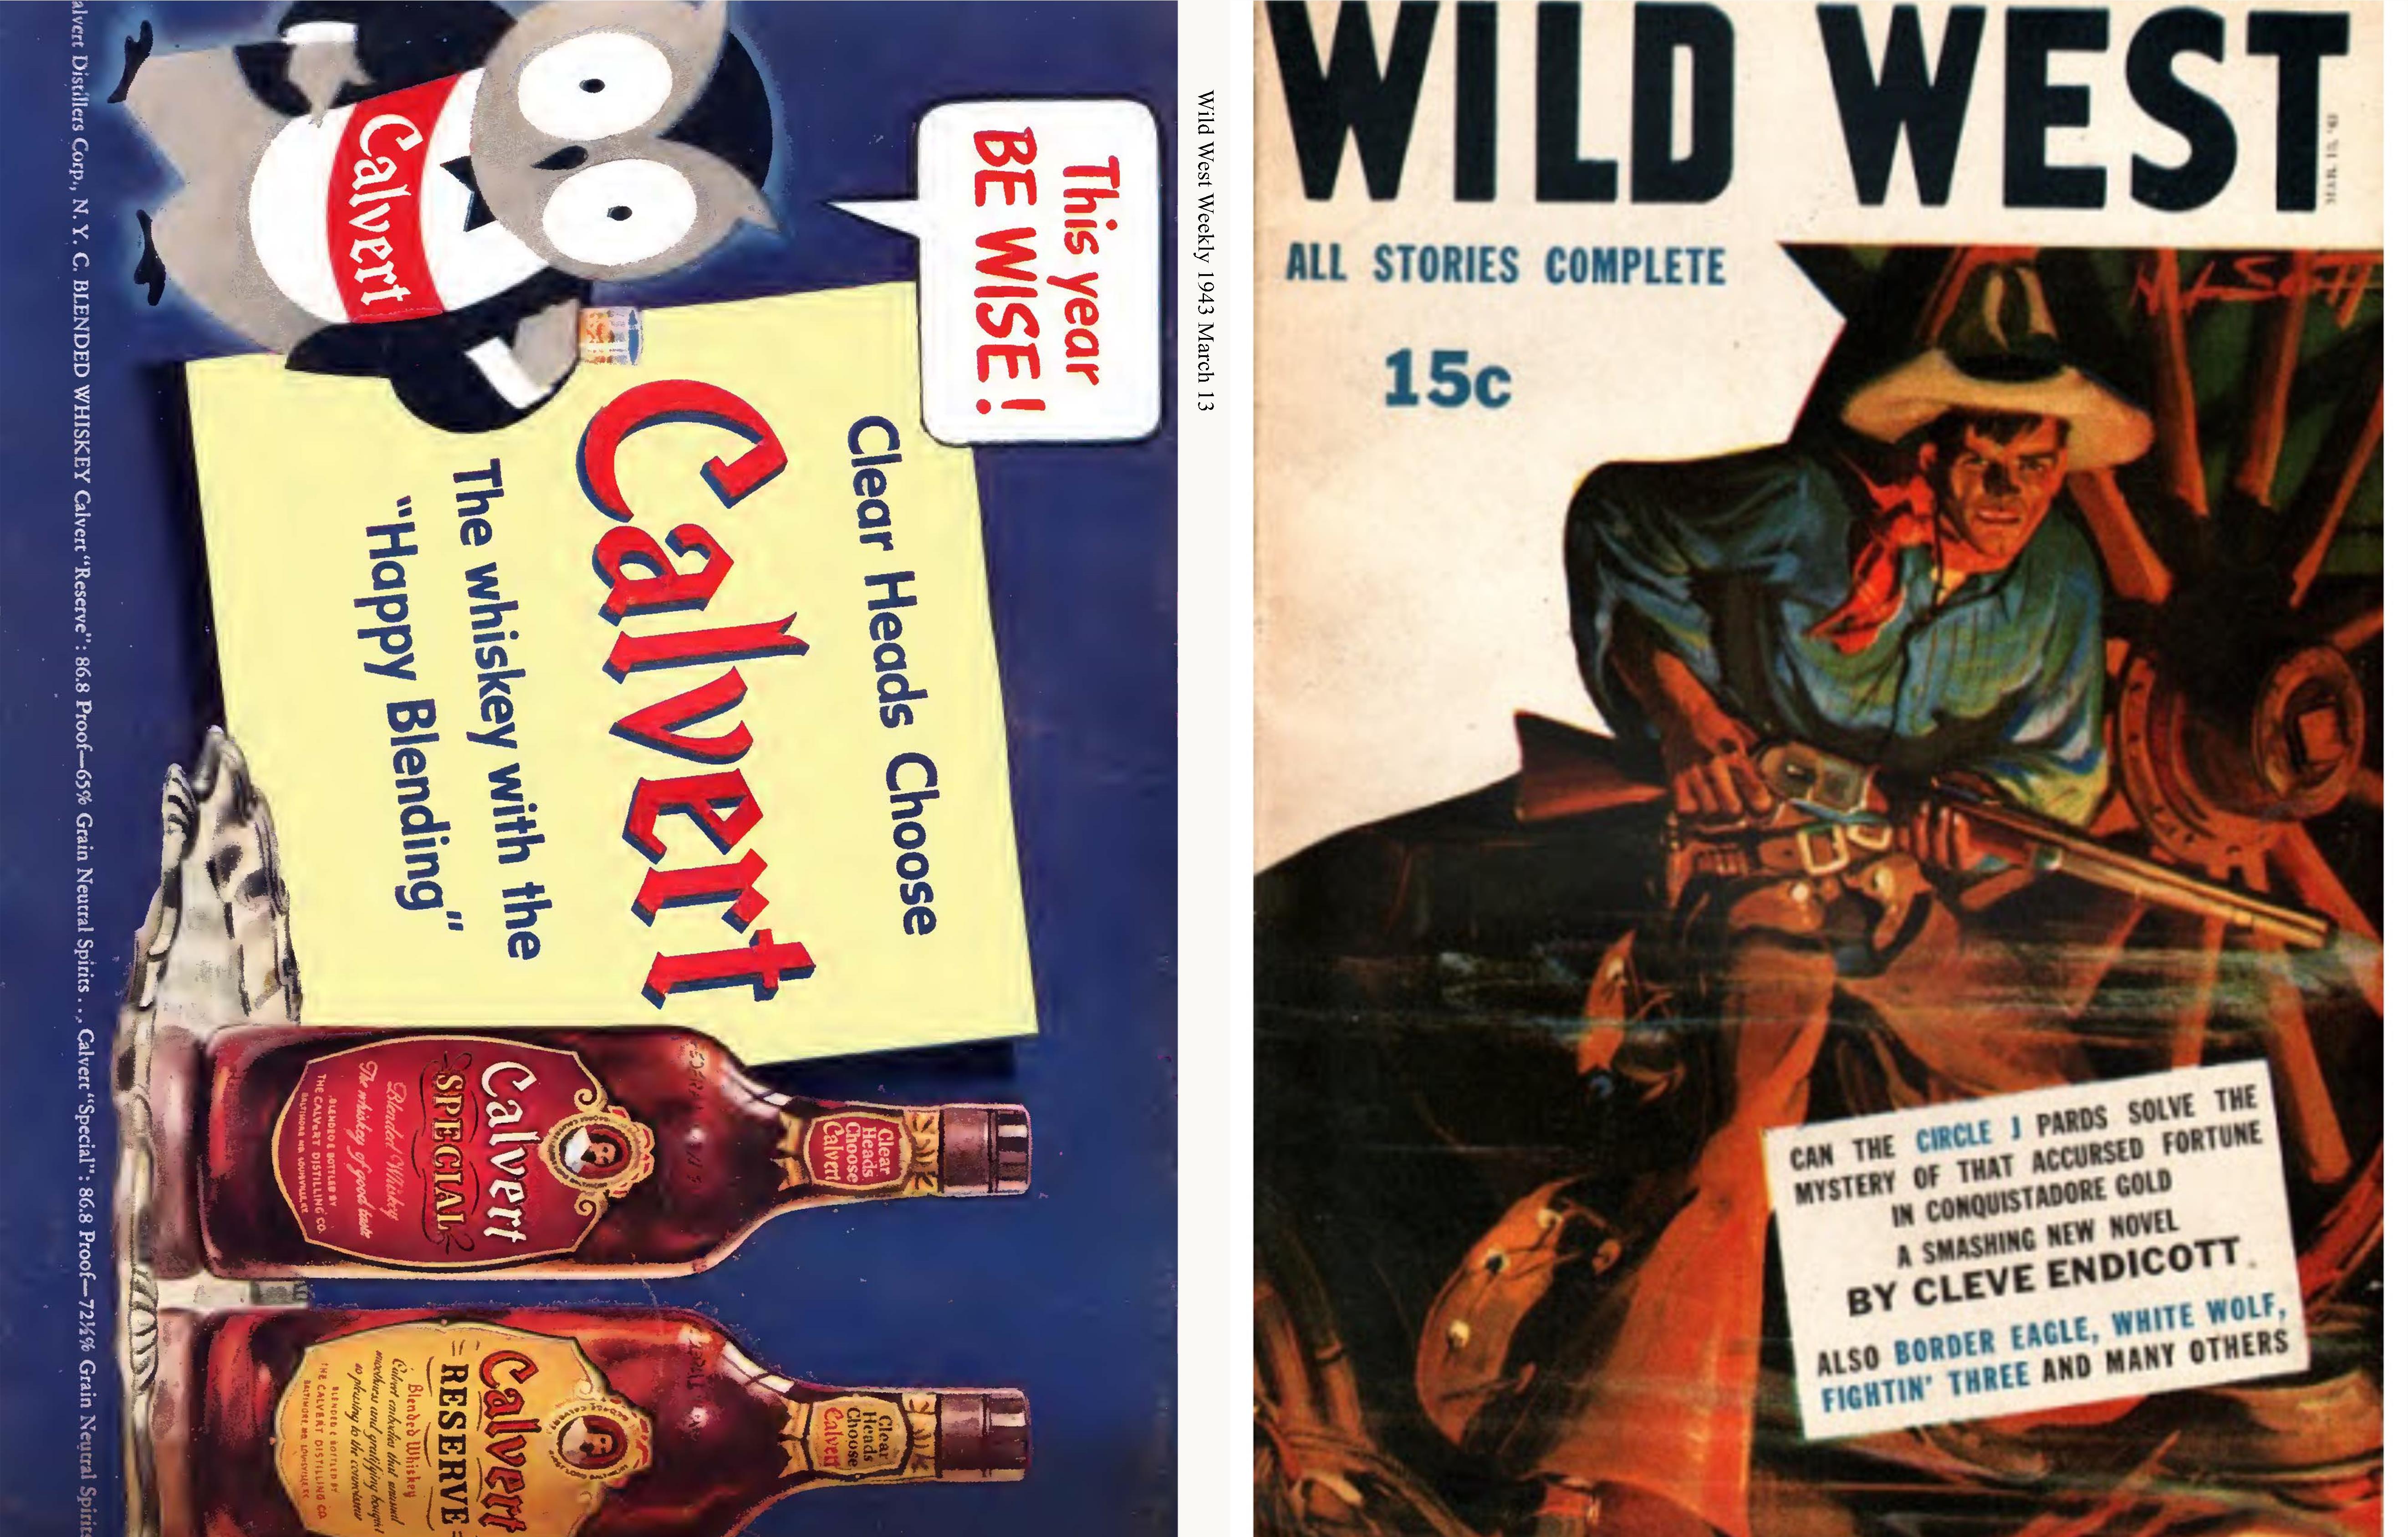 Wild West Weekly 1943 March 13 cover image